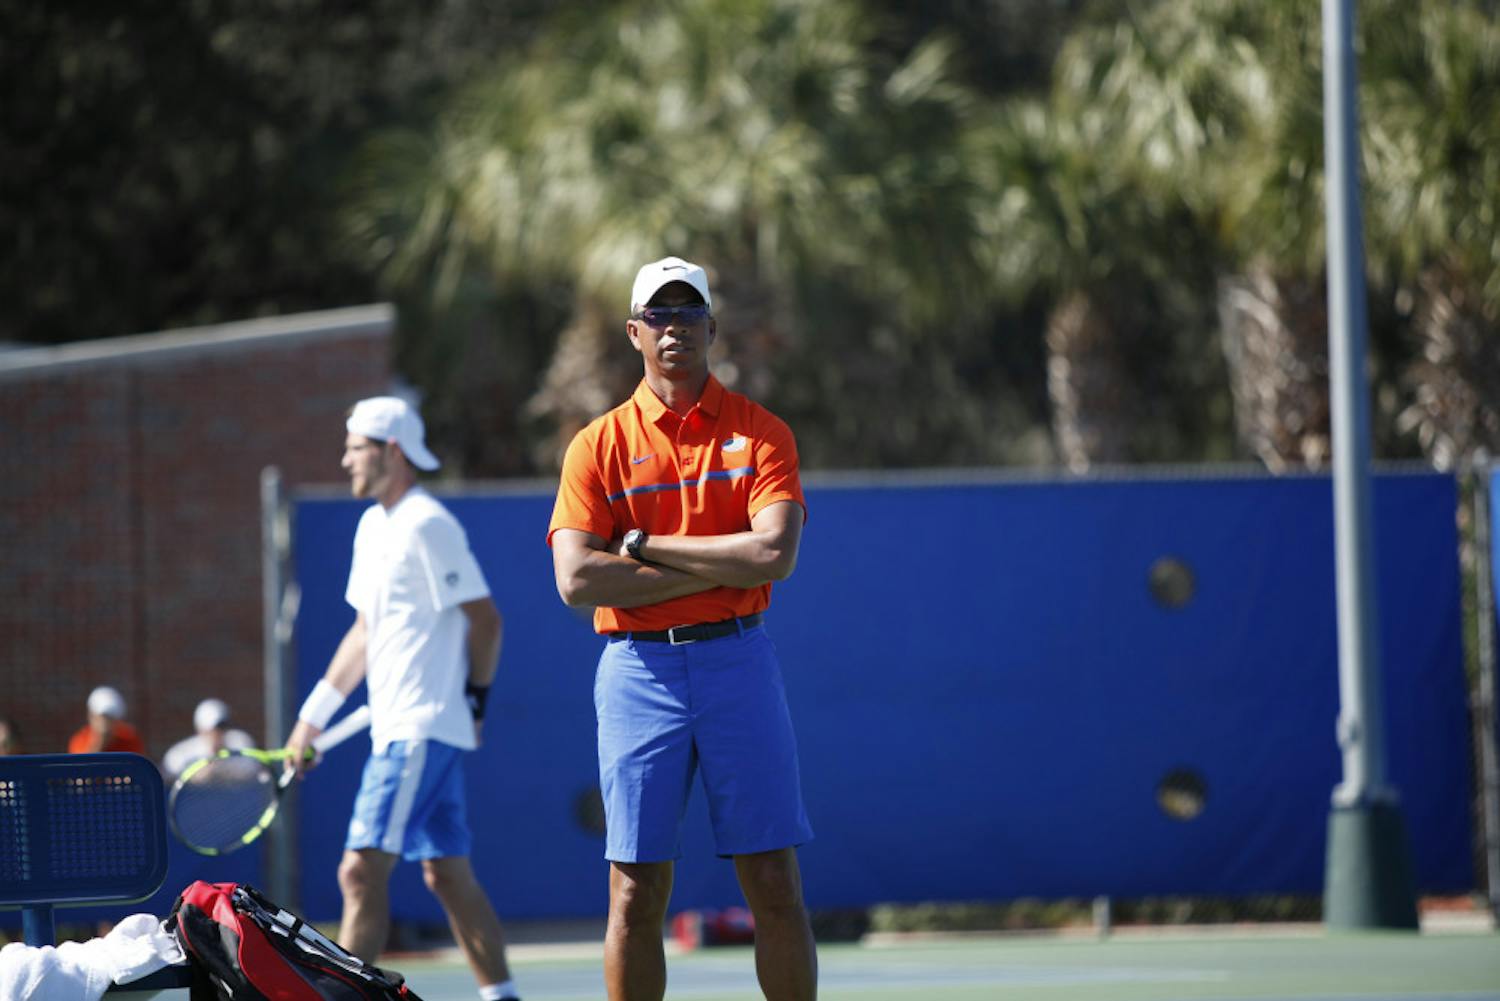 UF men's tennis coach Bryan Shelton looks on during Florida's 4-2 win against UCLA on Feb. 5, 2017, at the Ring Tennis Complex.